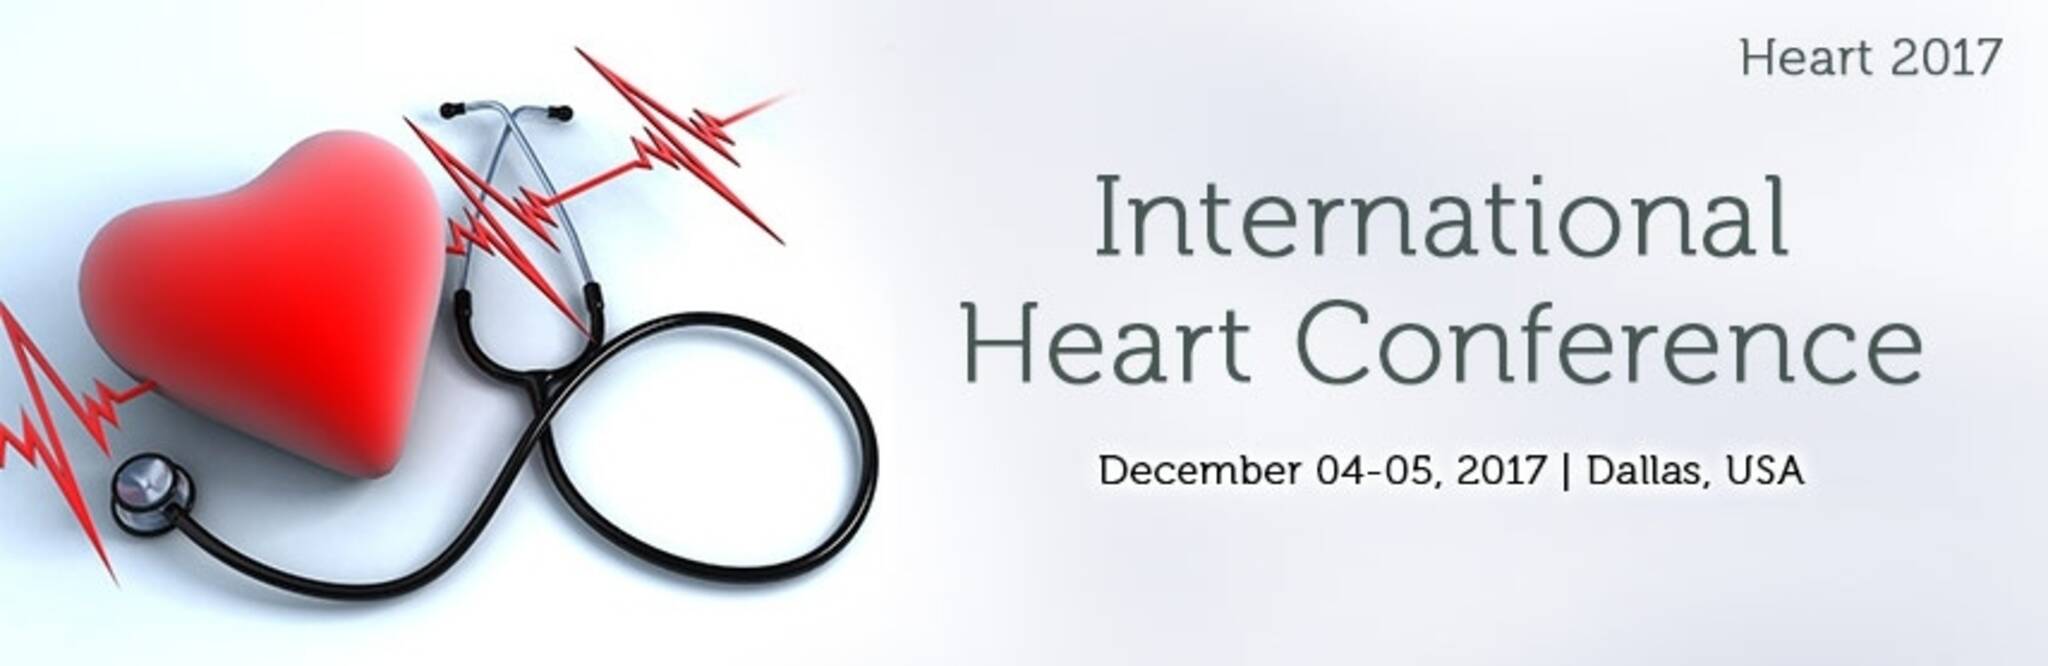 International Heart Conference